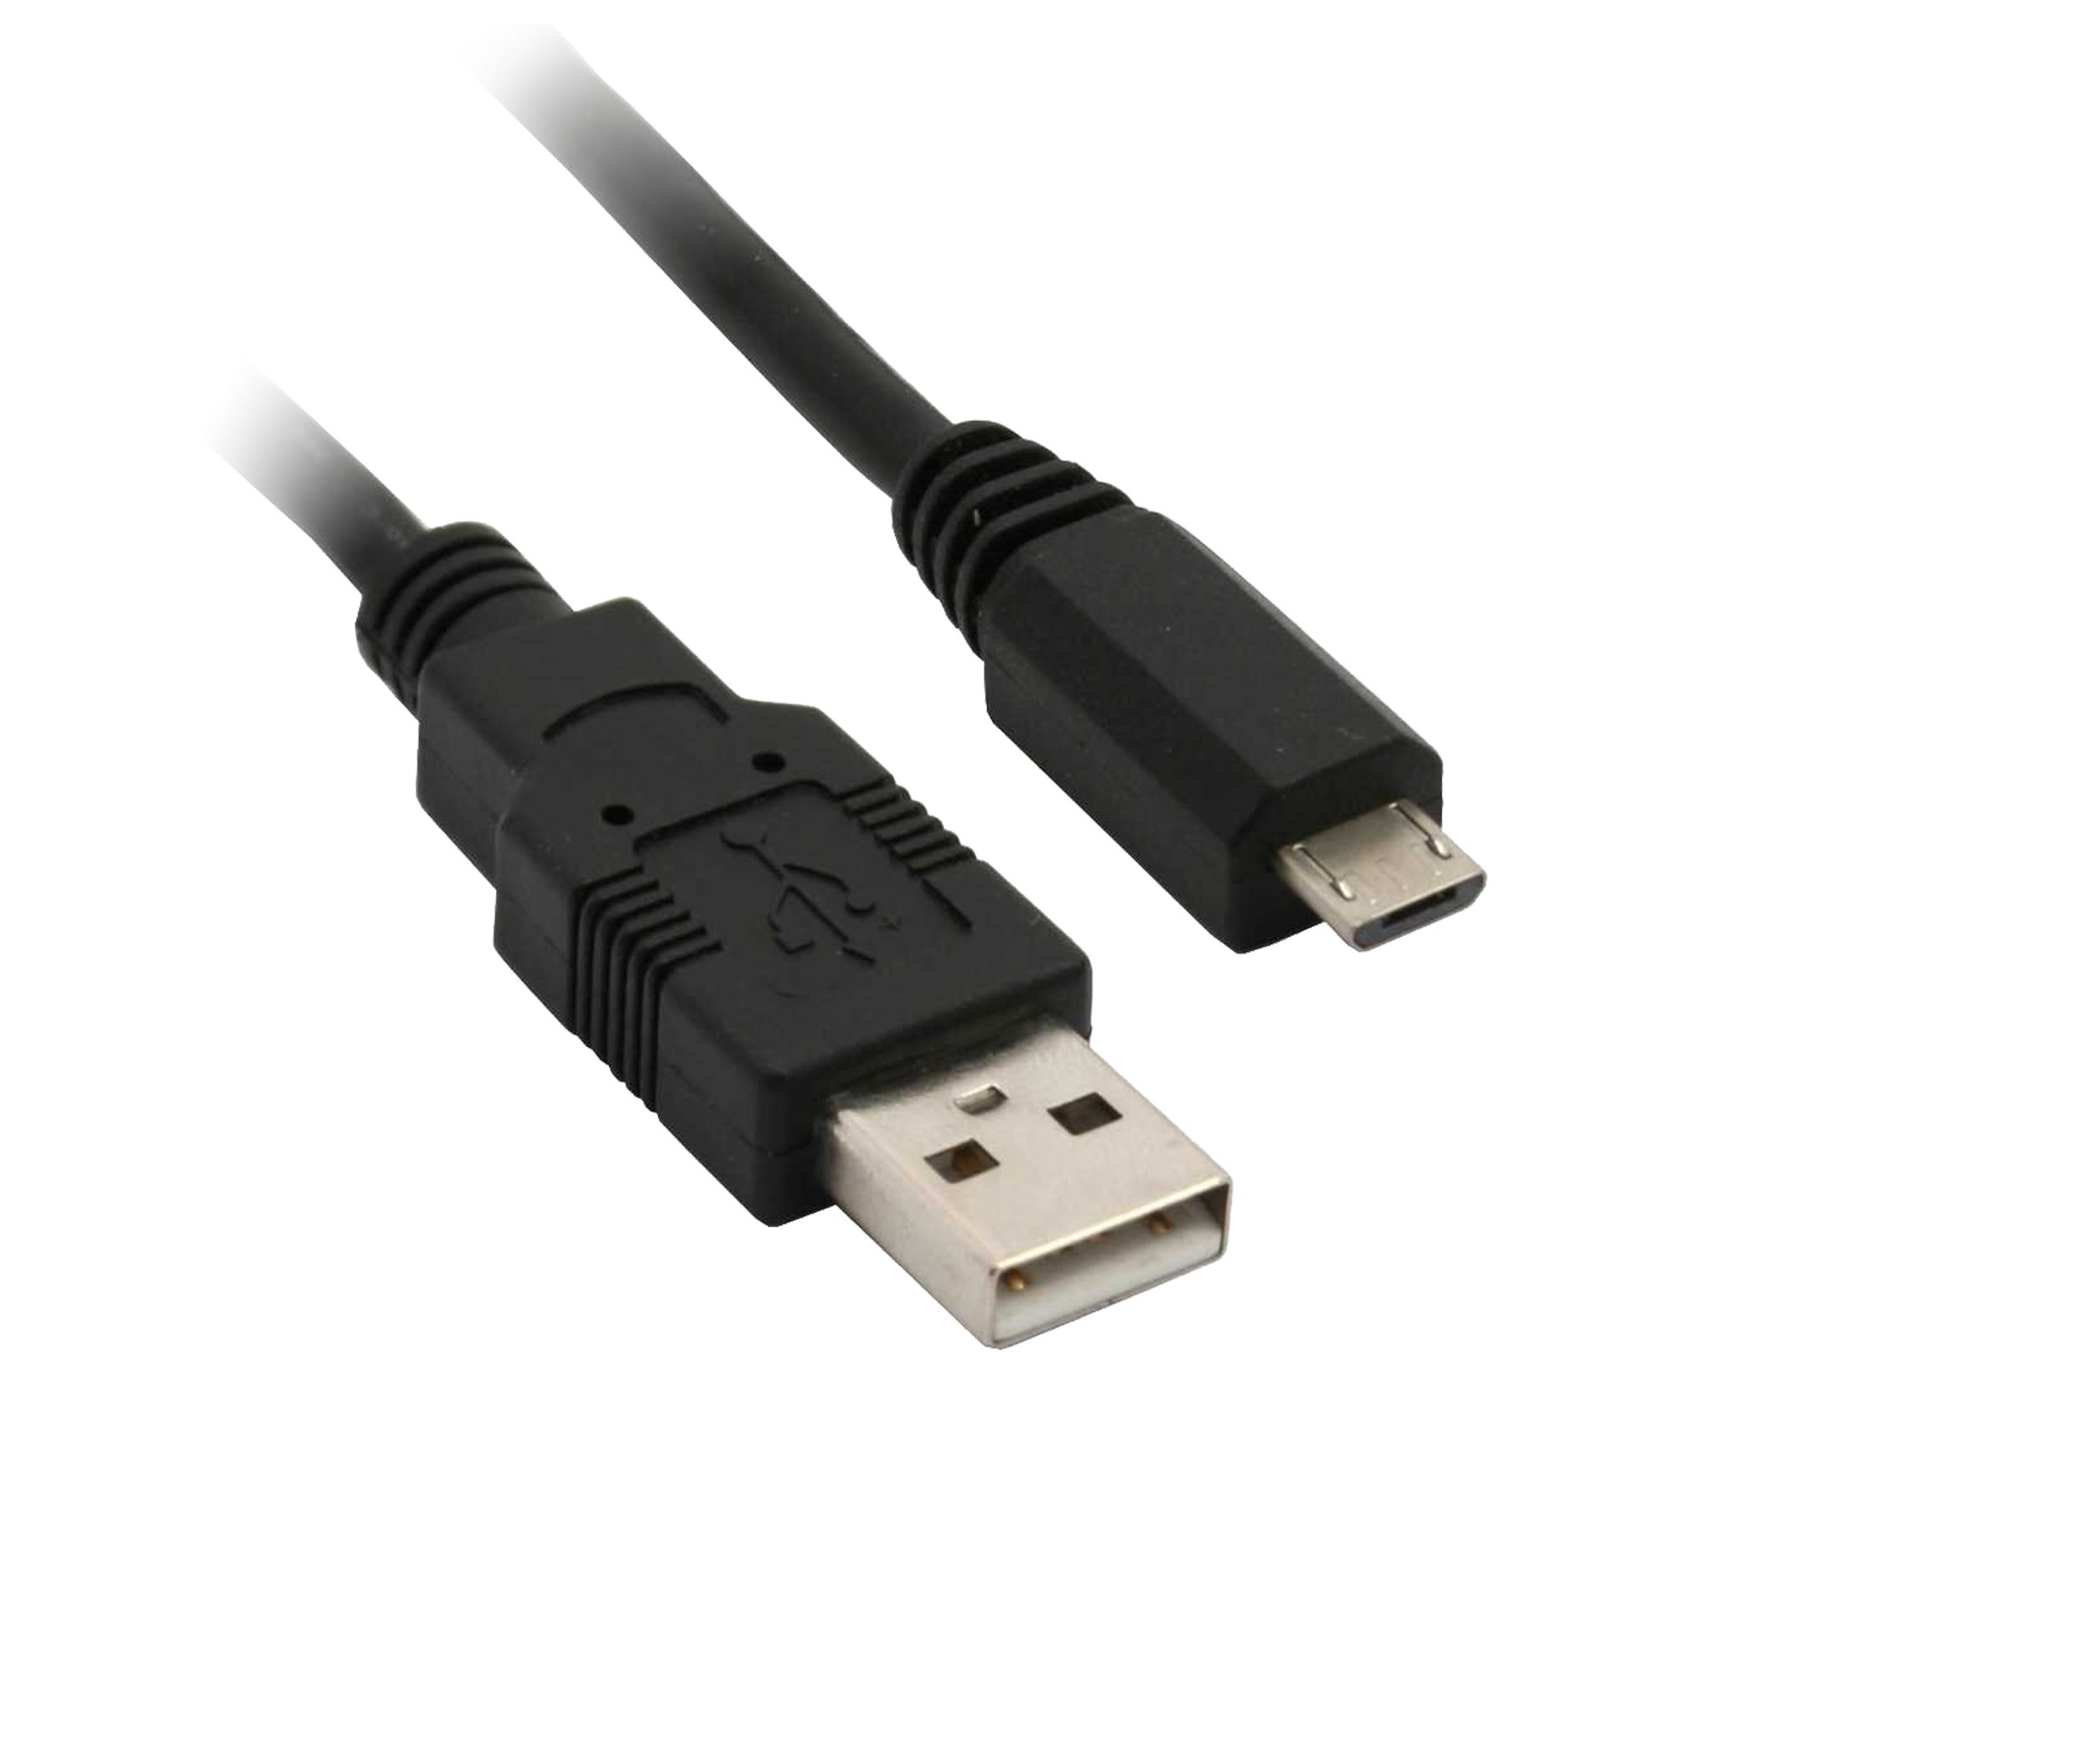 Evolveo Microusb Cable For Phones G2 G4 Z1 Z3 Ep 500 Ep 600 Ep 700 Ep 800 Ep 900 Evolveo Com Ch